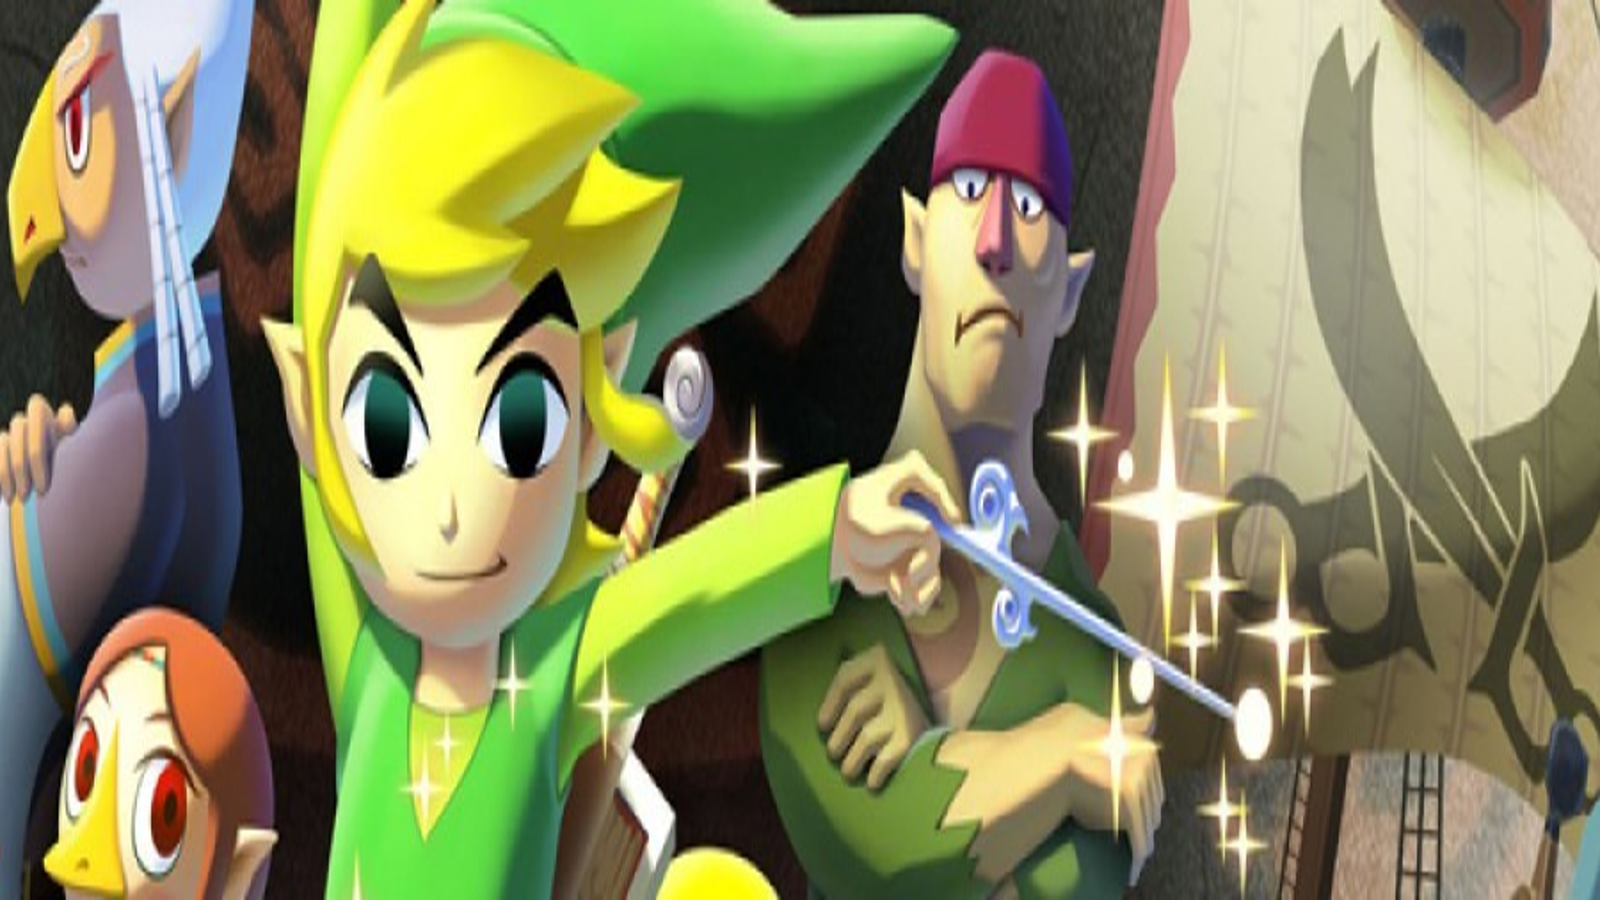 Preview: The Legend of Zelda: The Wind Waker HD